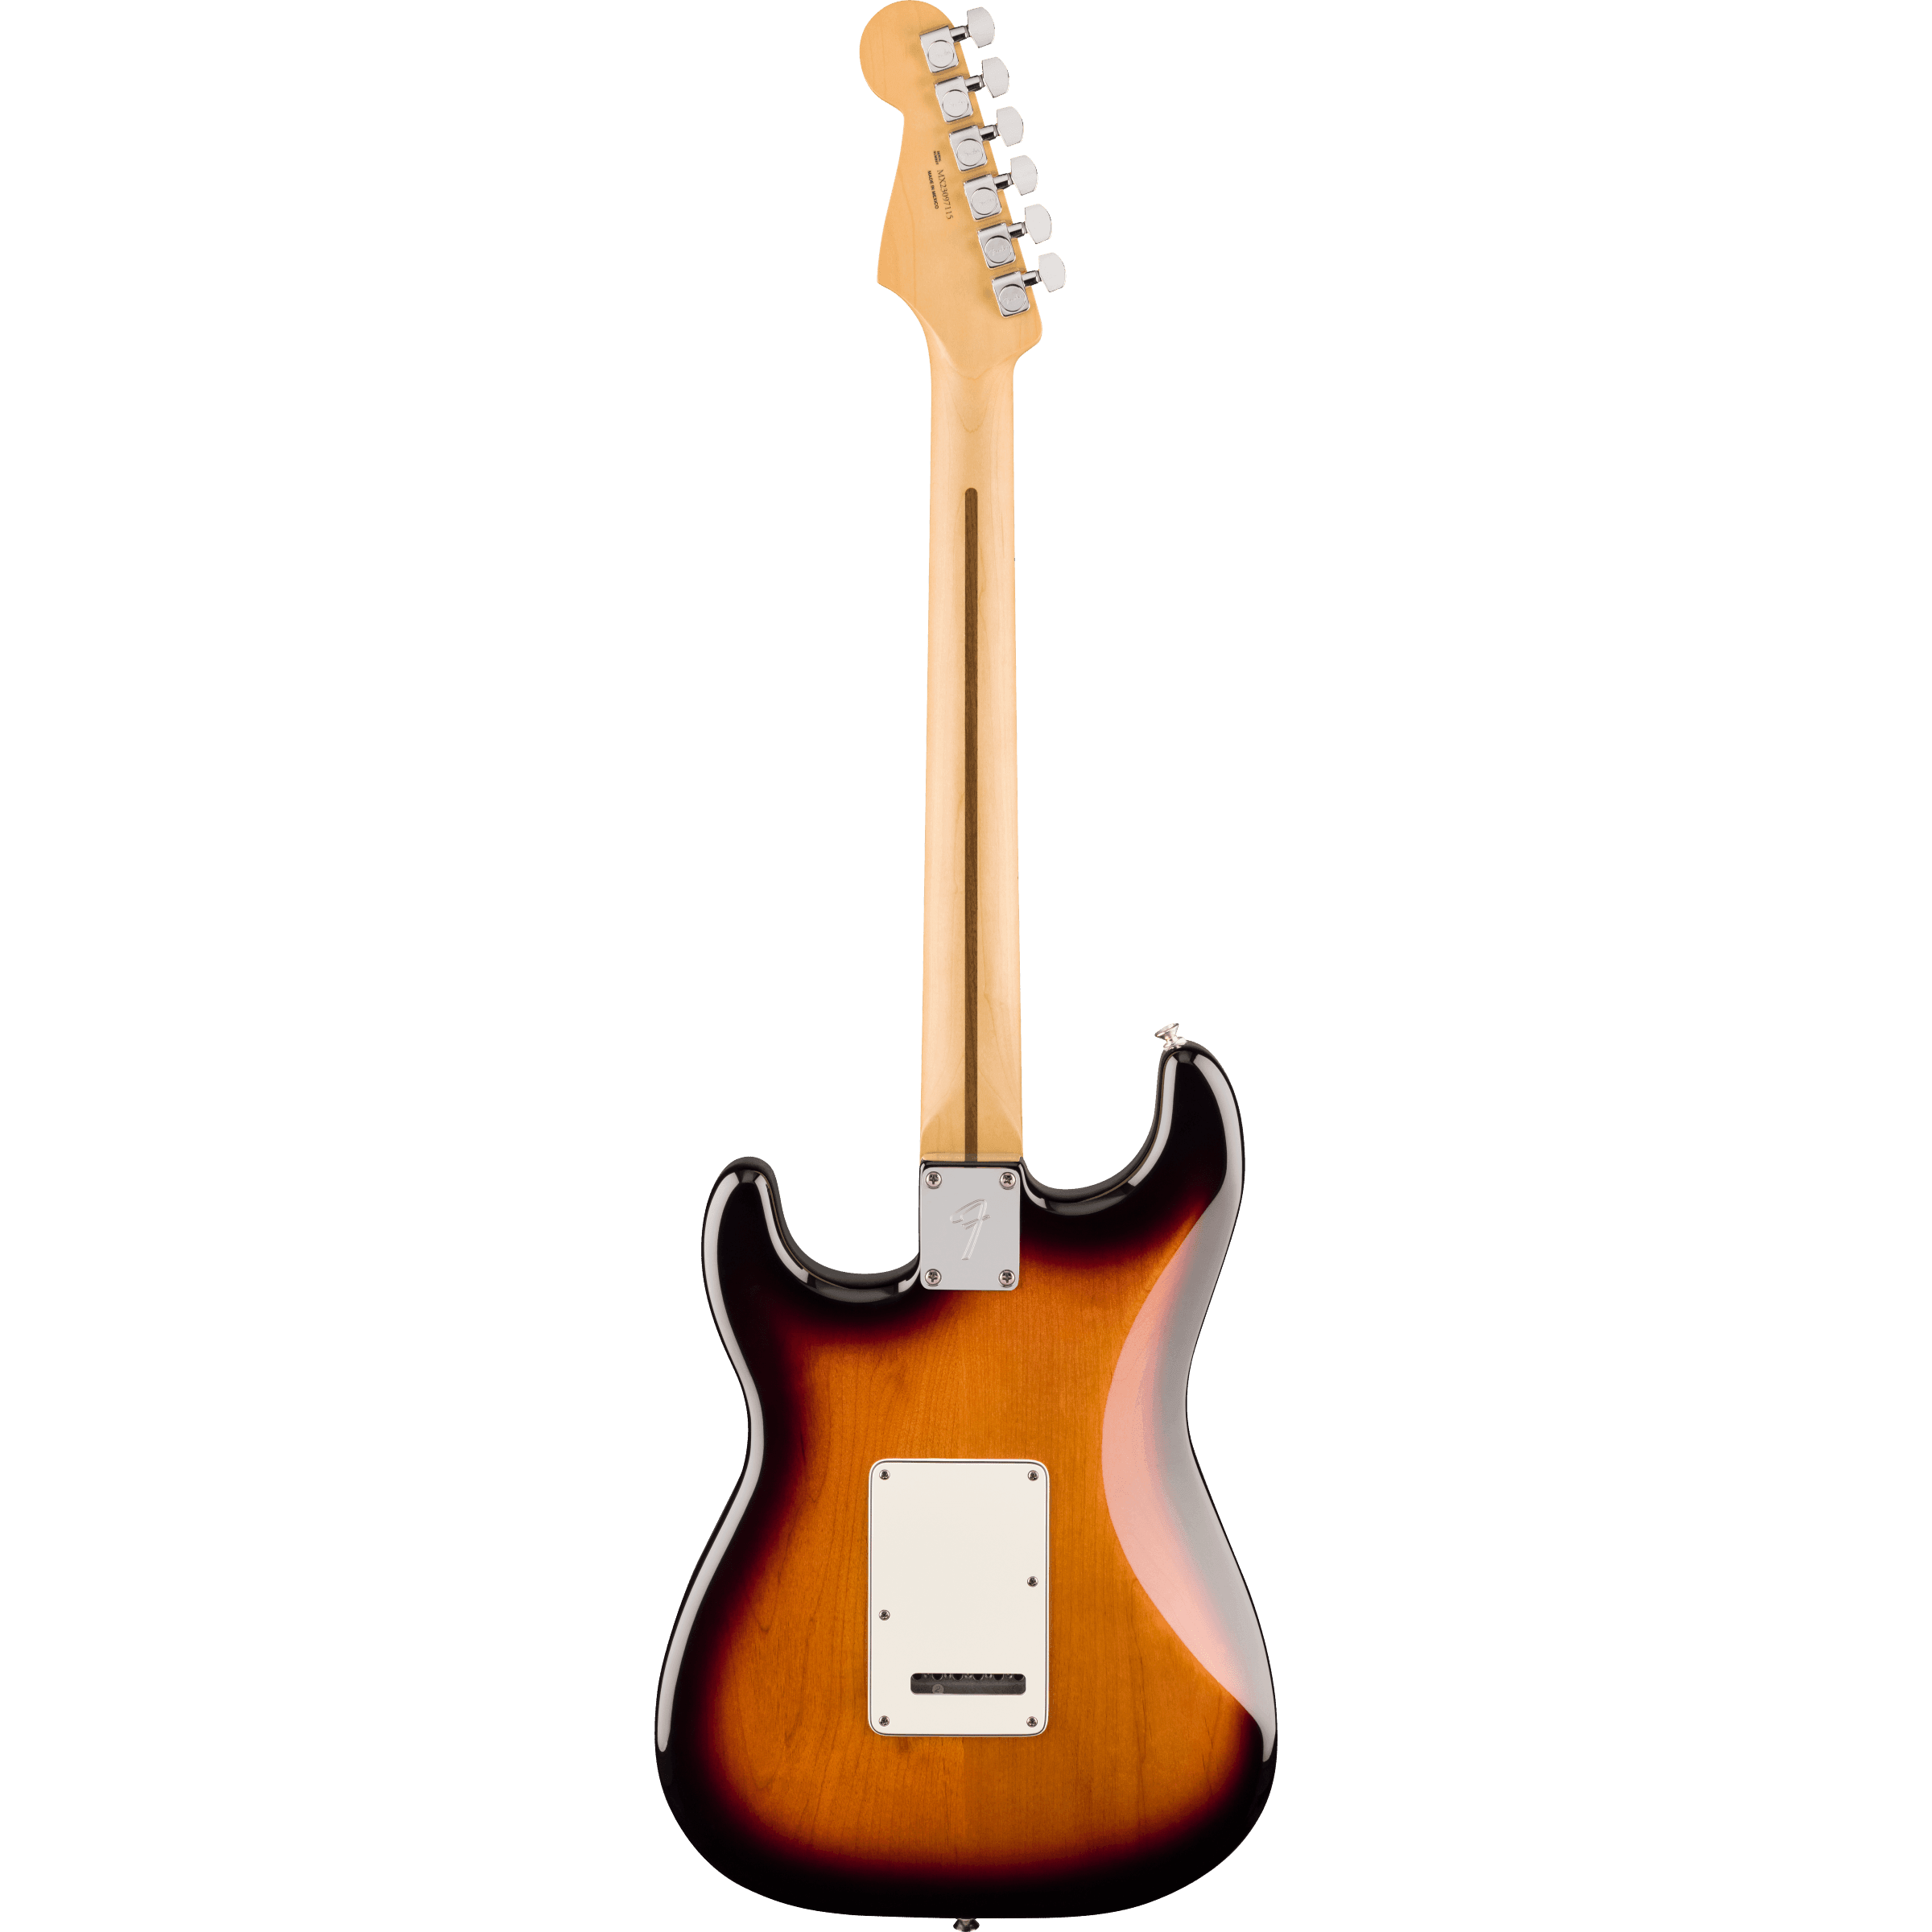 Player Strat Maple Neck Two-Tone Sunburst - Guitars - Electric by Fender at Muso's Stuff